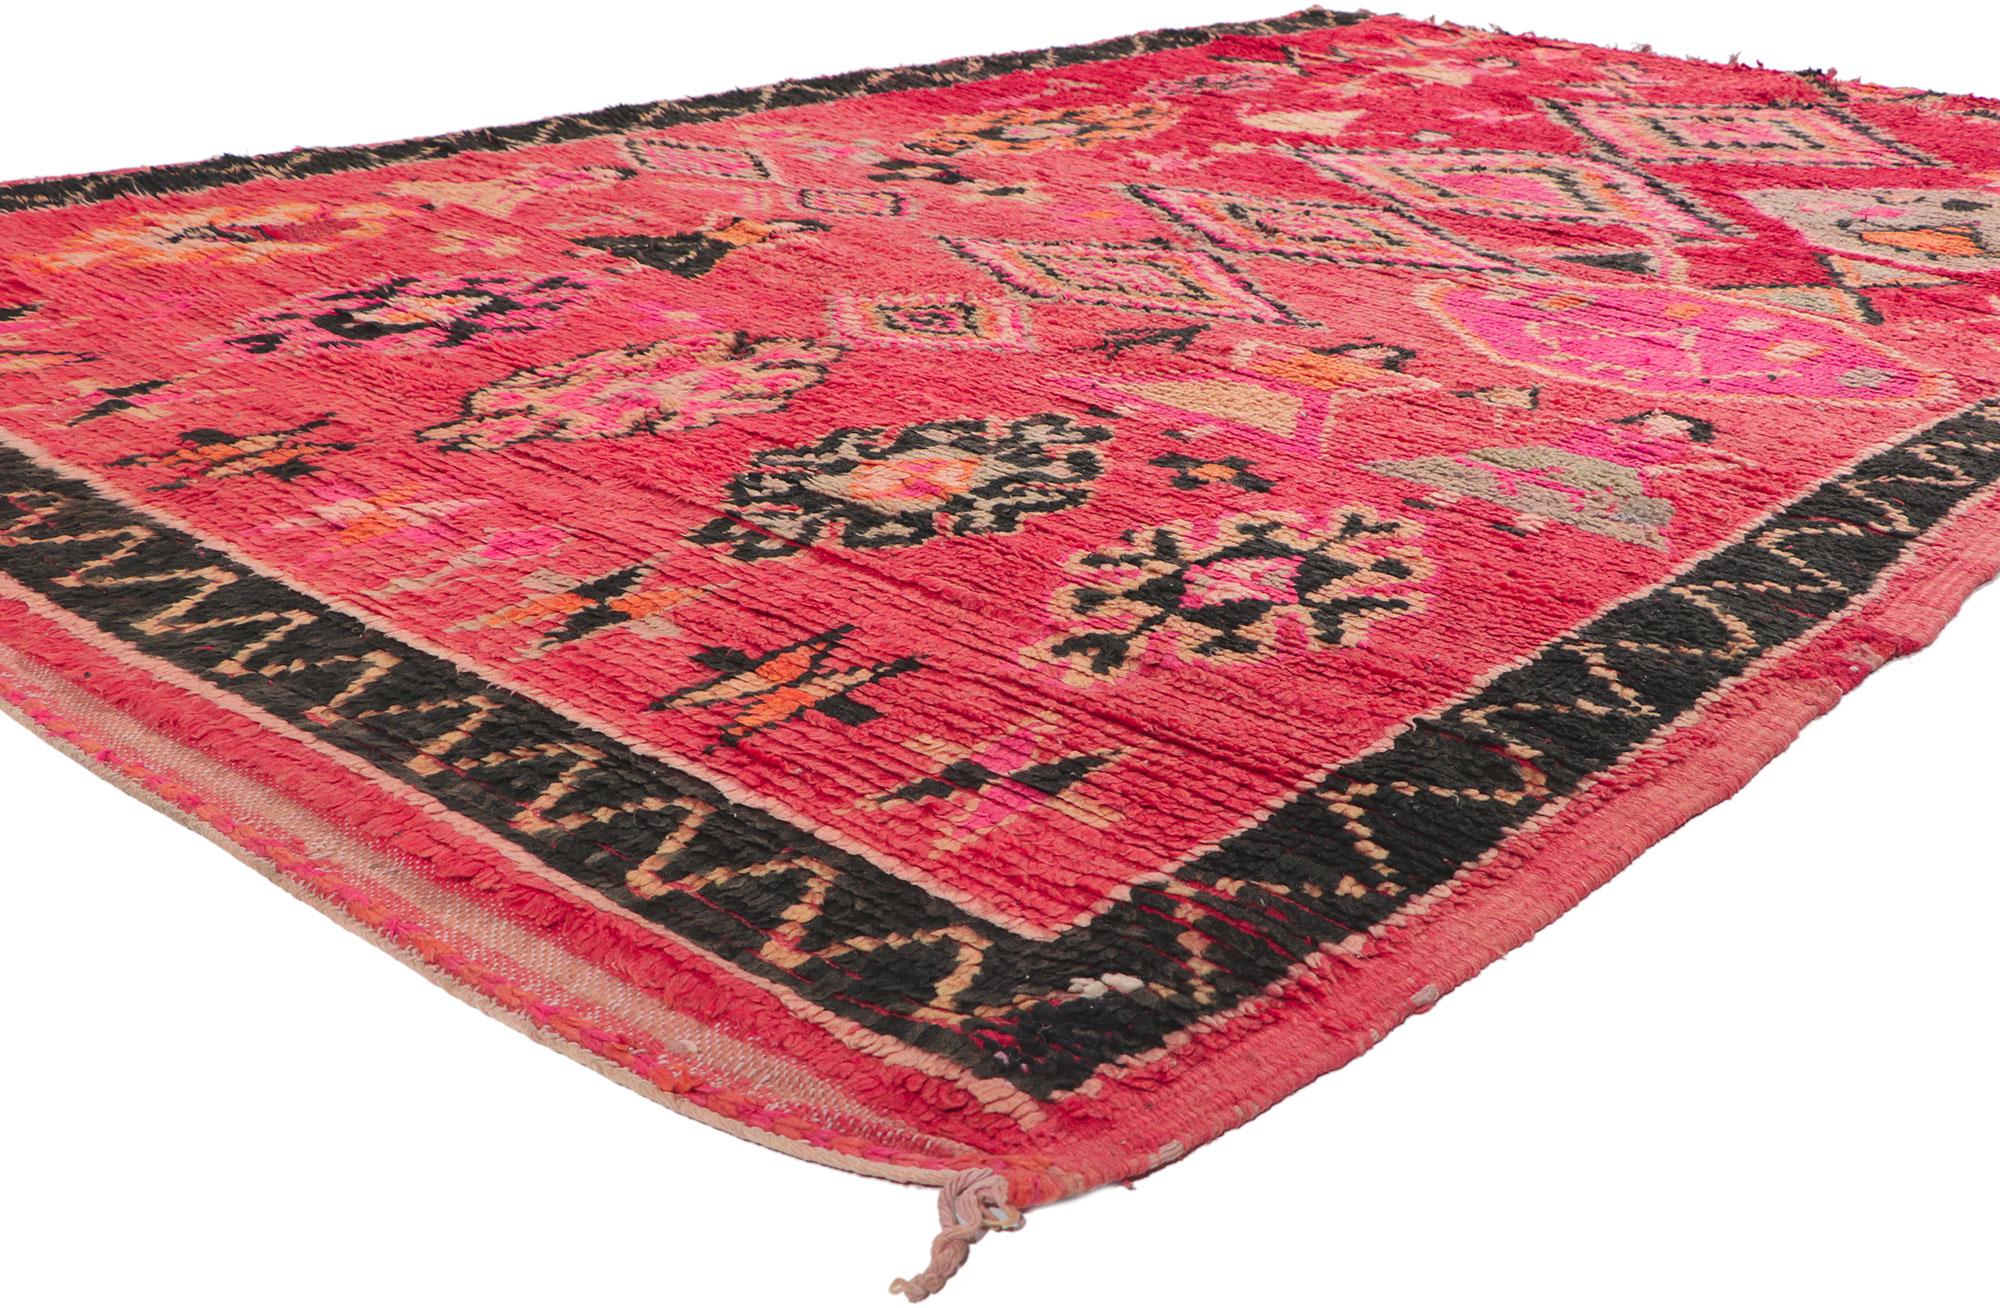 78364 Vintage Berber Moroccan Rug, 06'07 x 10'07.
Showcasing an expressive tribal design, incredible detail and texture, this hand knotted wool vintage Berber Moroccan rug is a captivating vision of woven beauty. The eye-catching geometric pattern